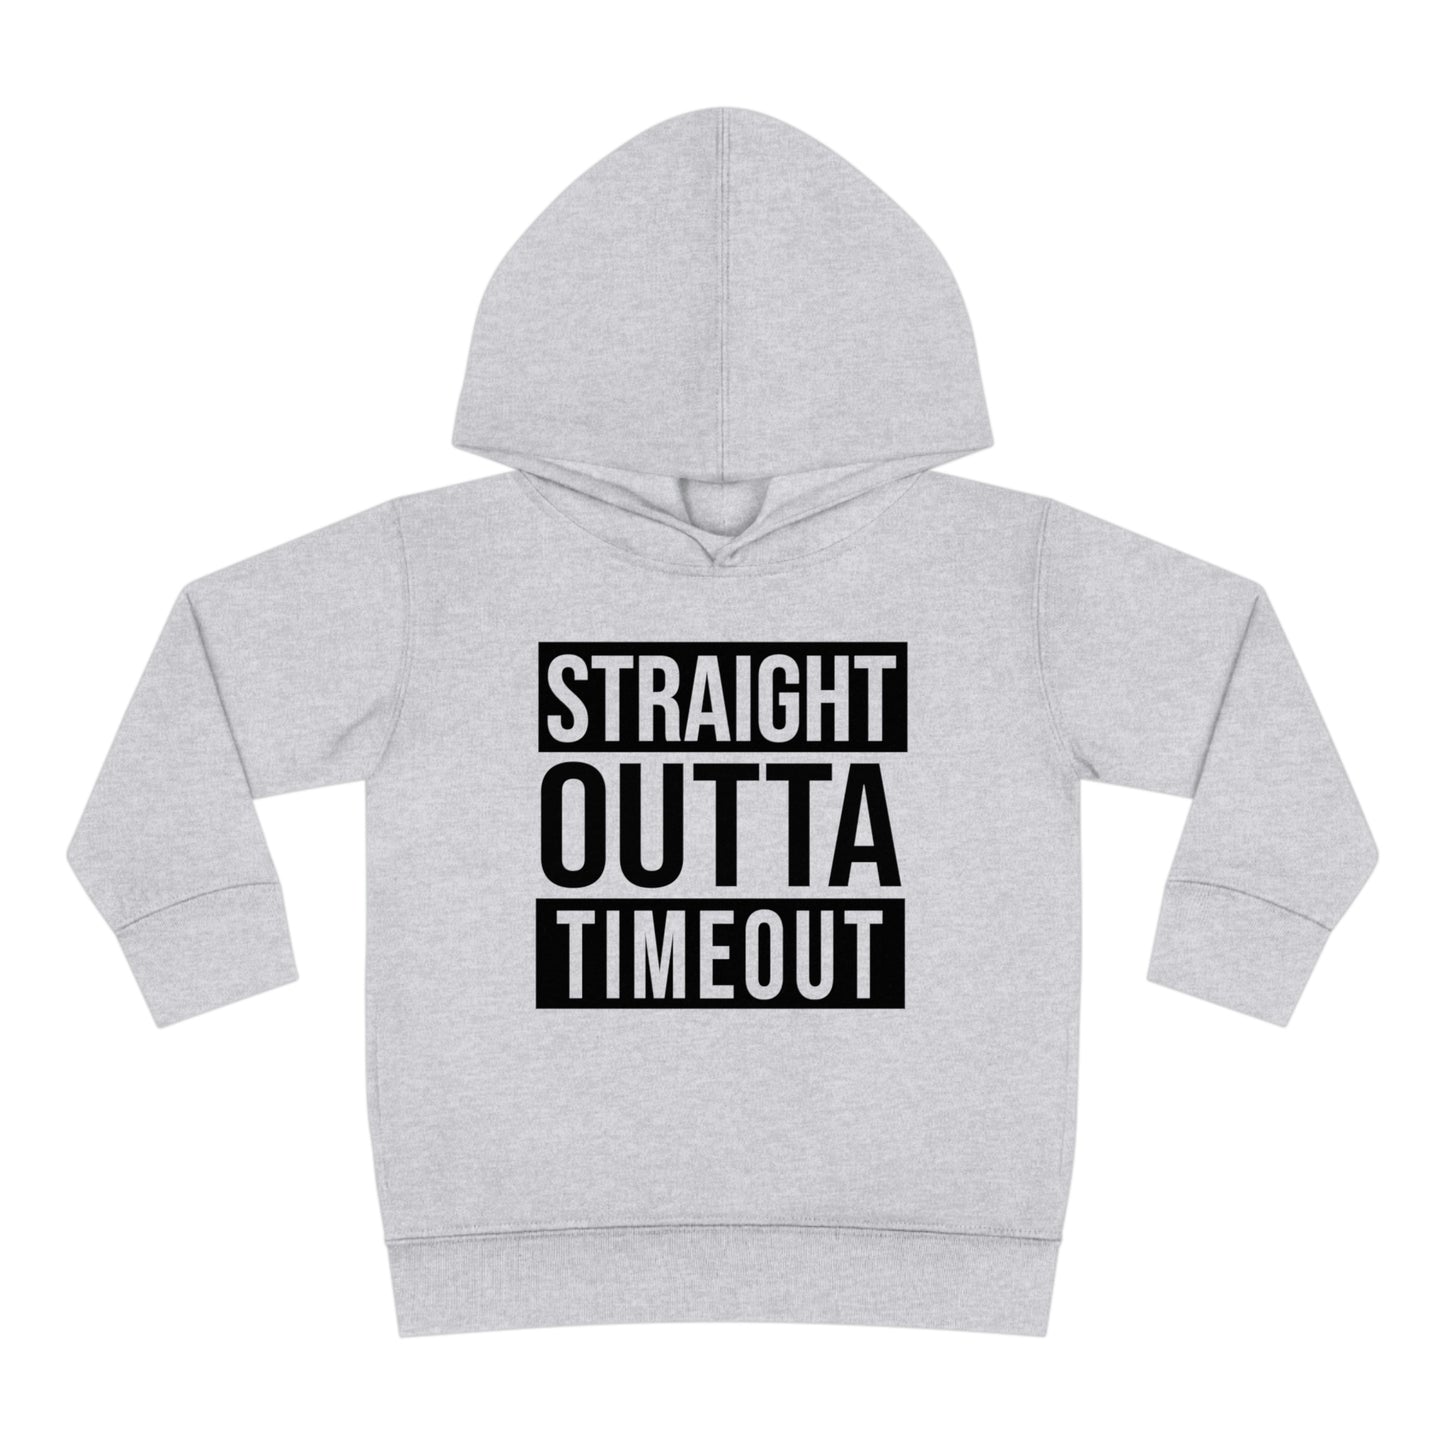 "Straight Outta Timeout" Toddler Pullover Fleece Hoodie (2T-6T)